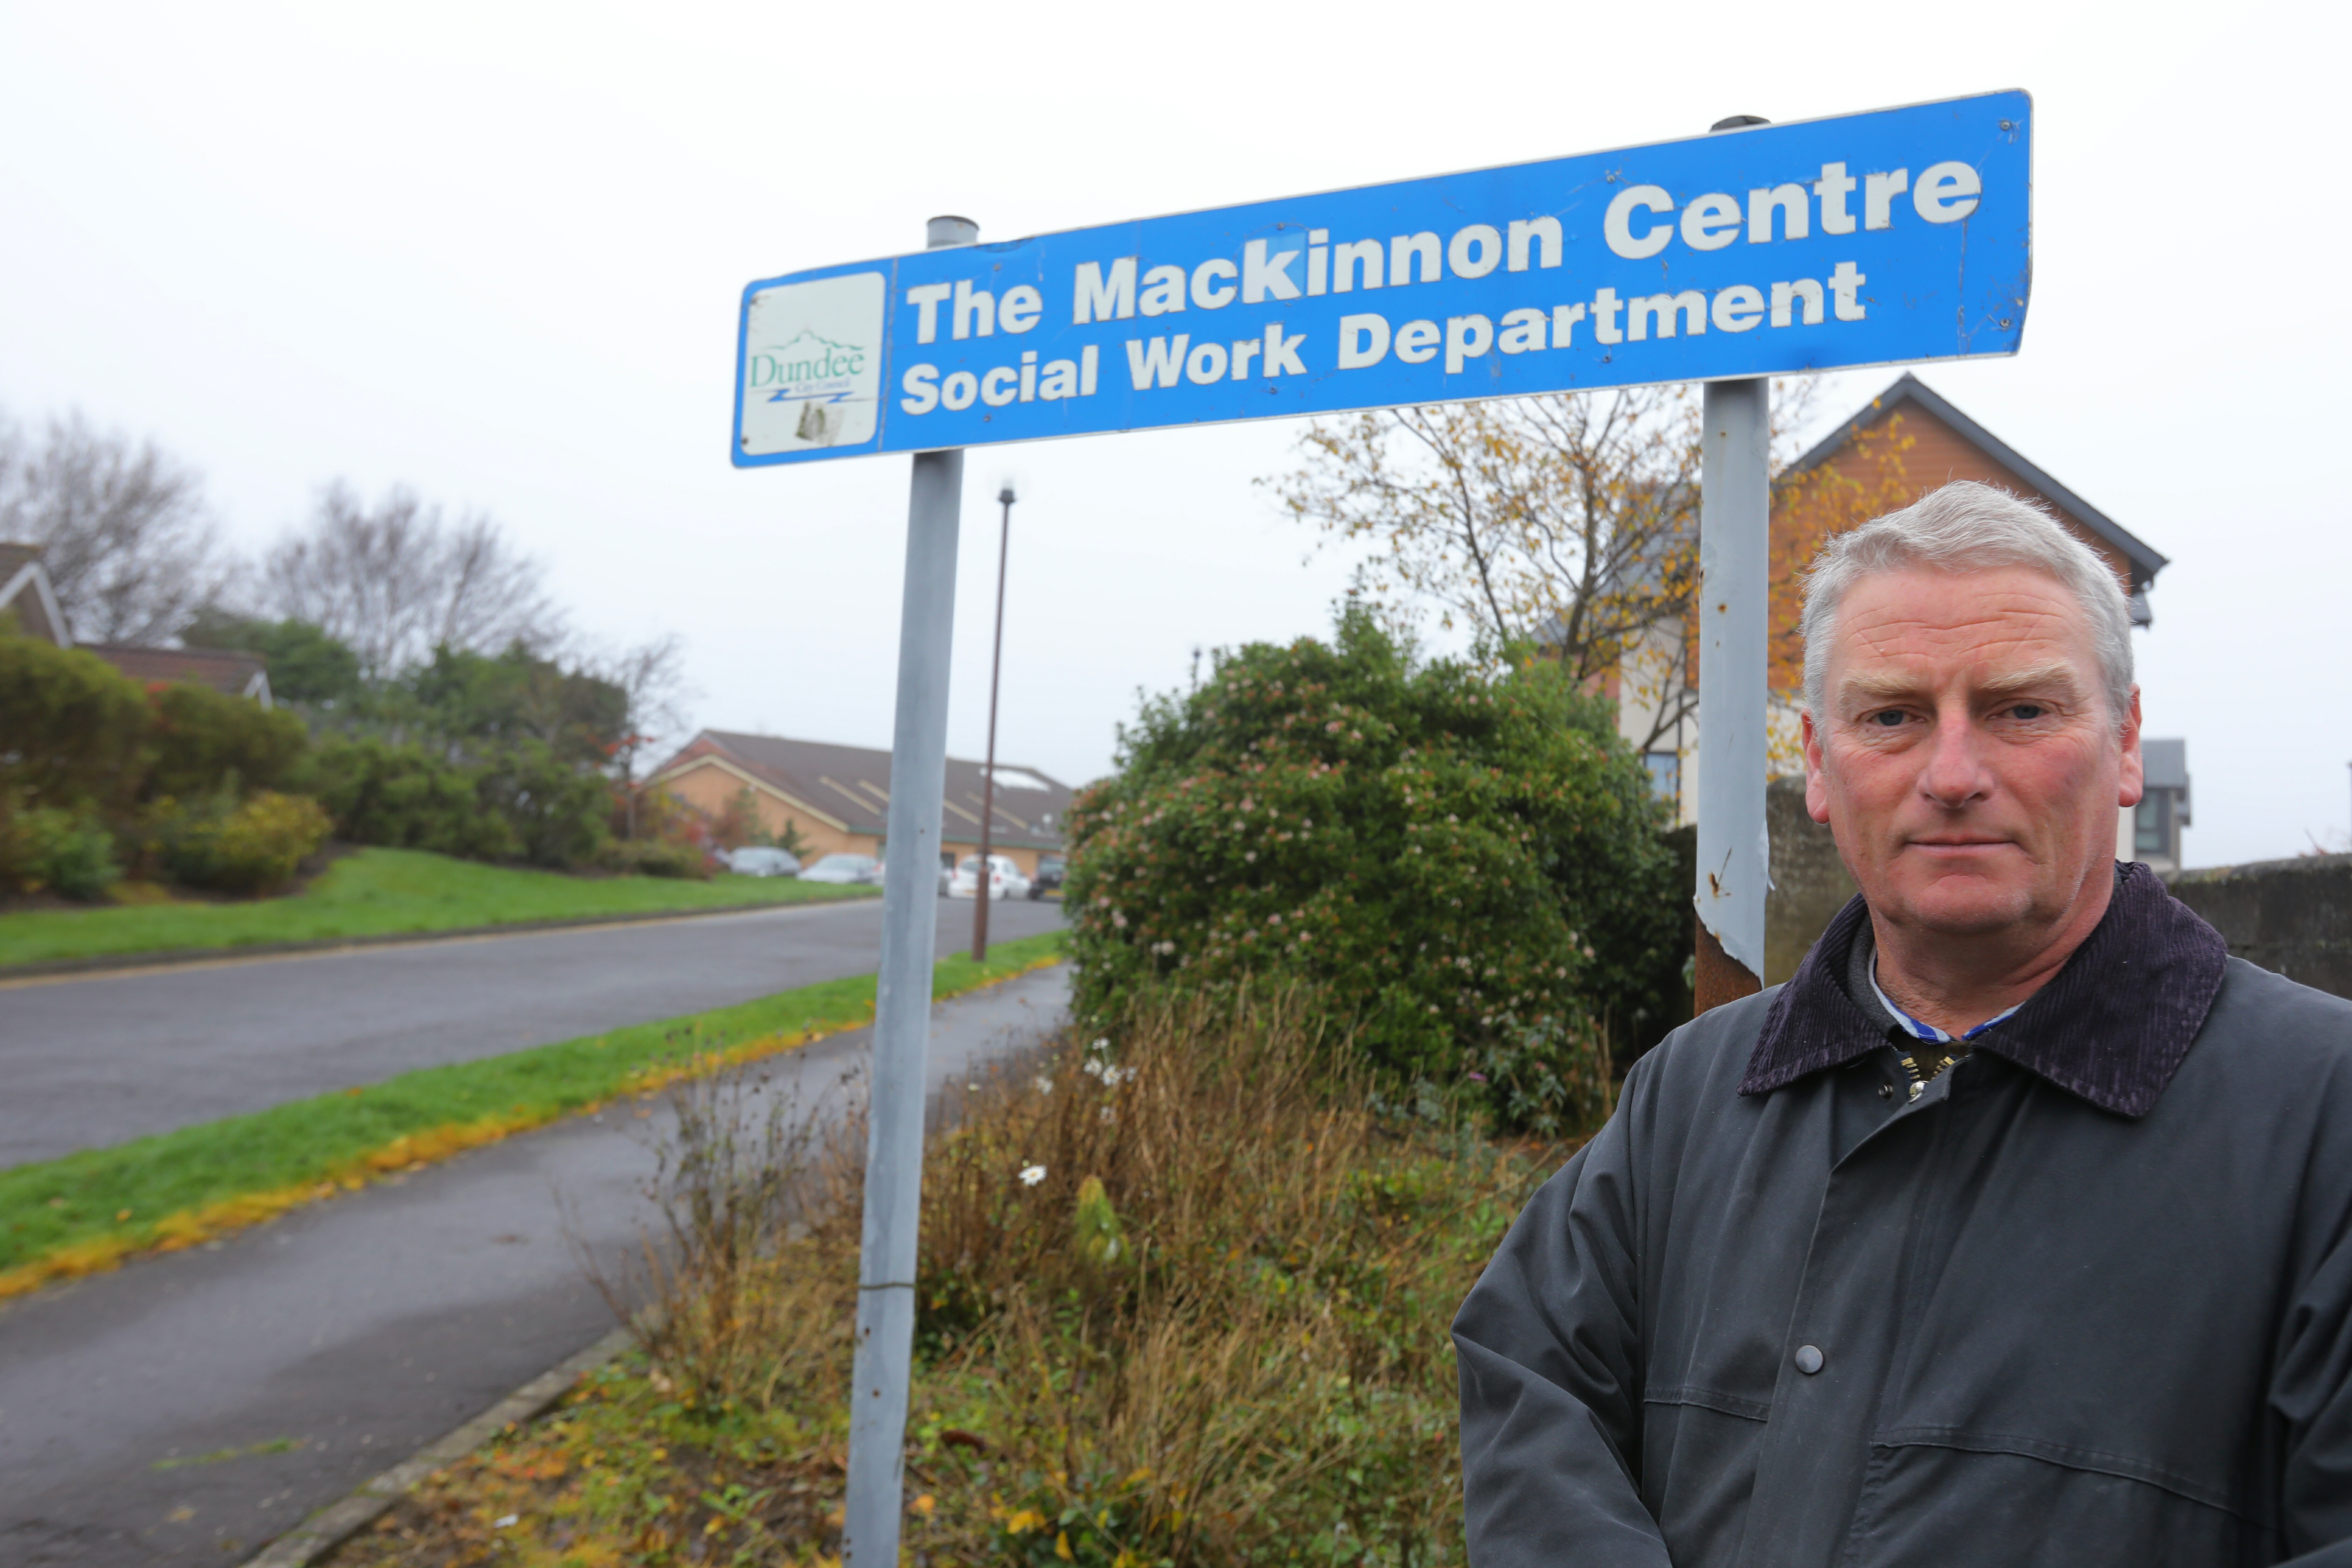 Cllr Craig Duncan at the Mackinnon Centre in Broughty Ferry.